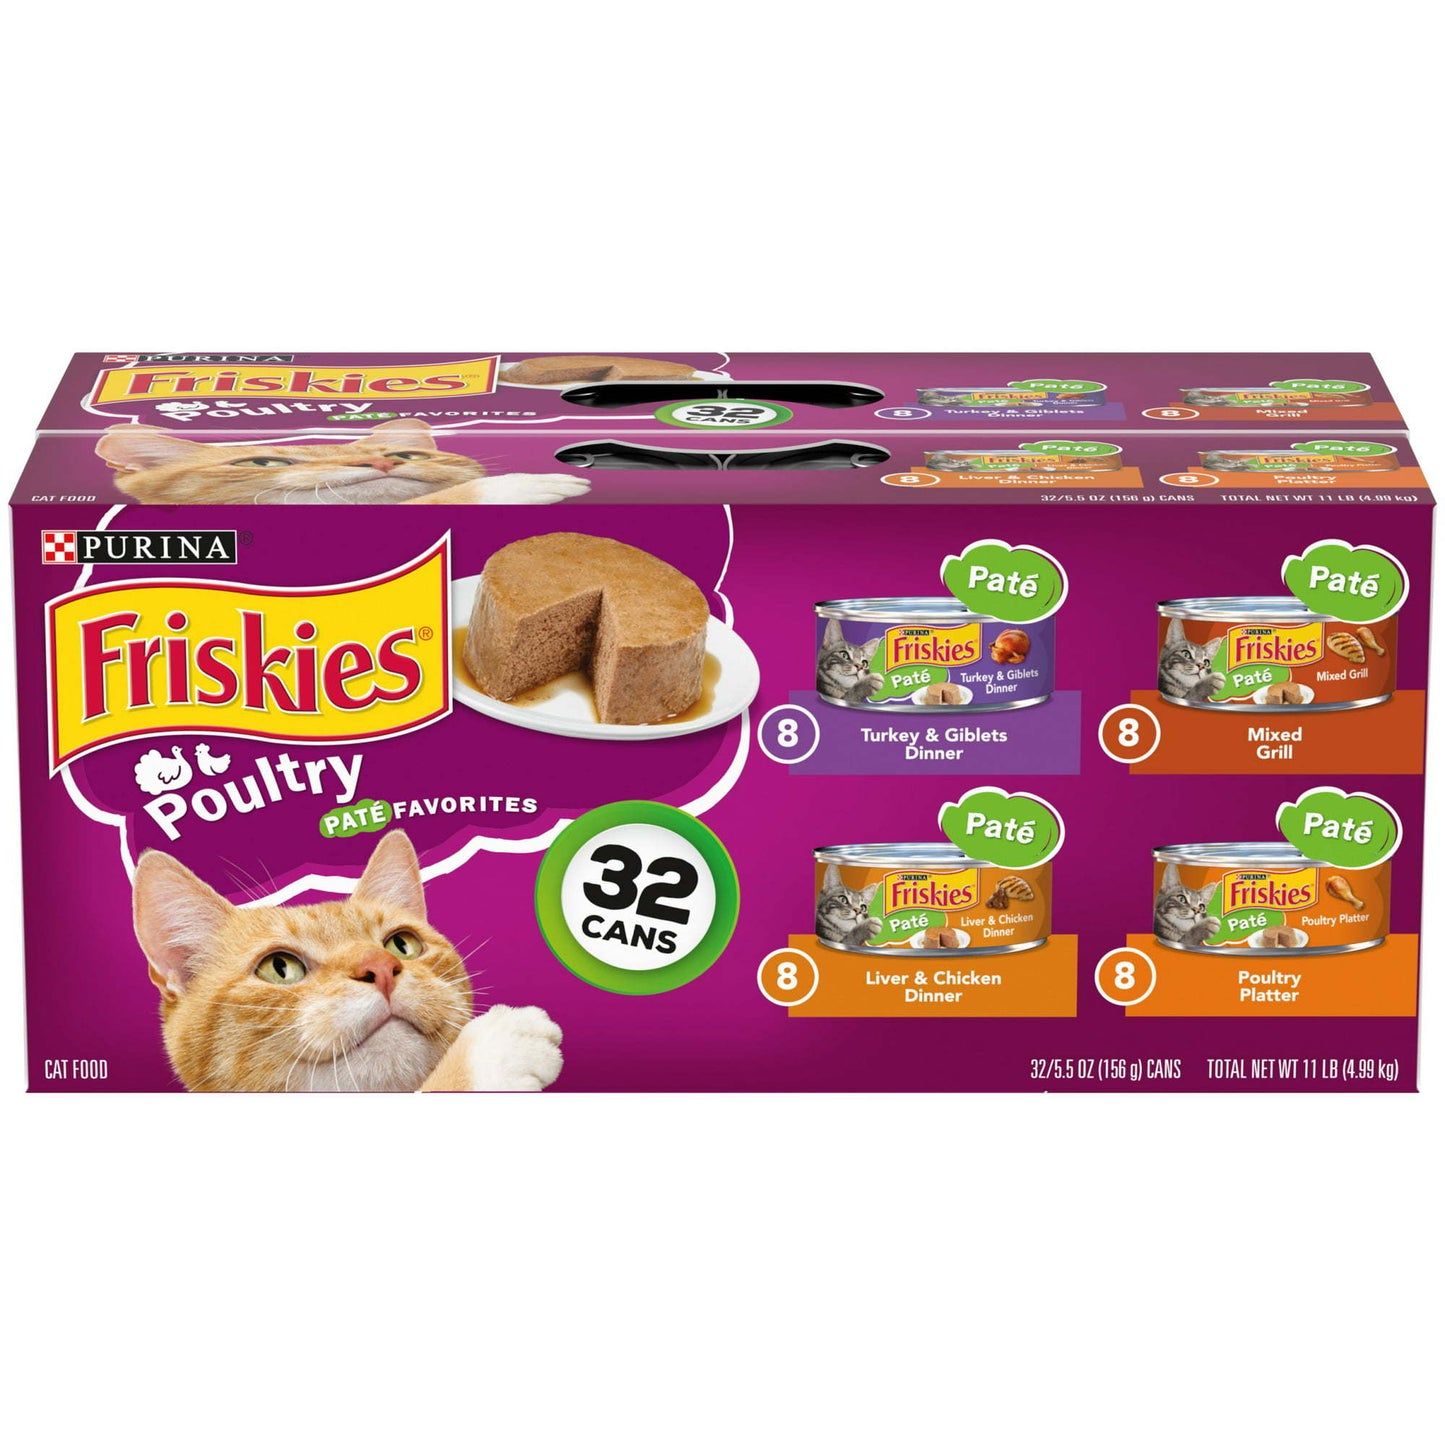 Purina Friskies Poultry Favorites Wet Cat Food Variety Pack 5.5 oz Cans (32 Pack)